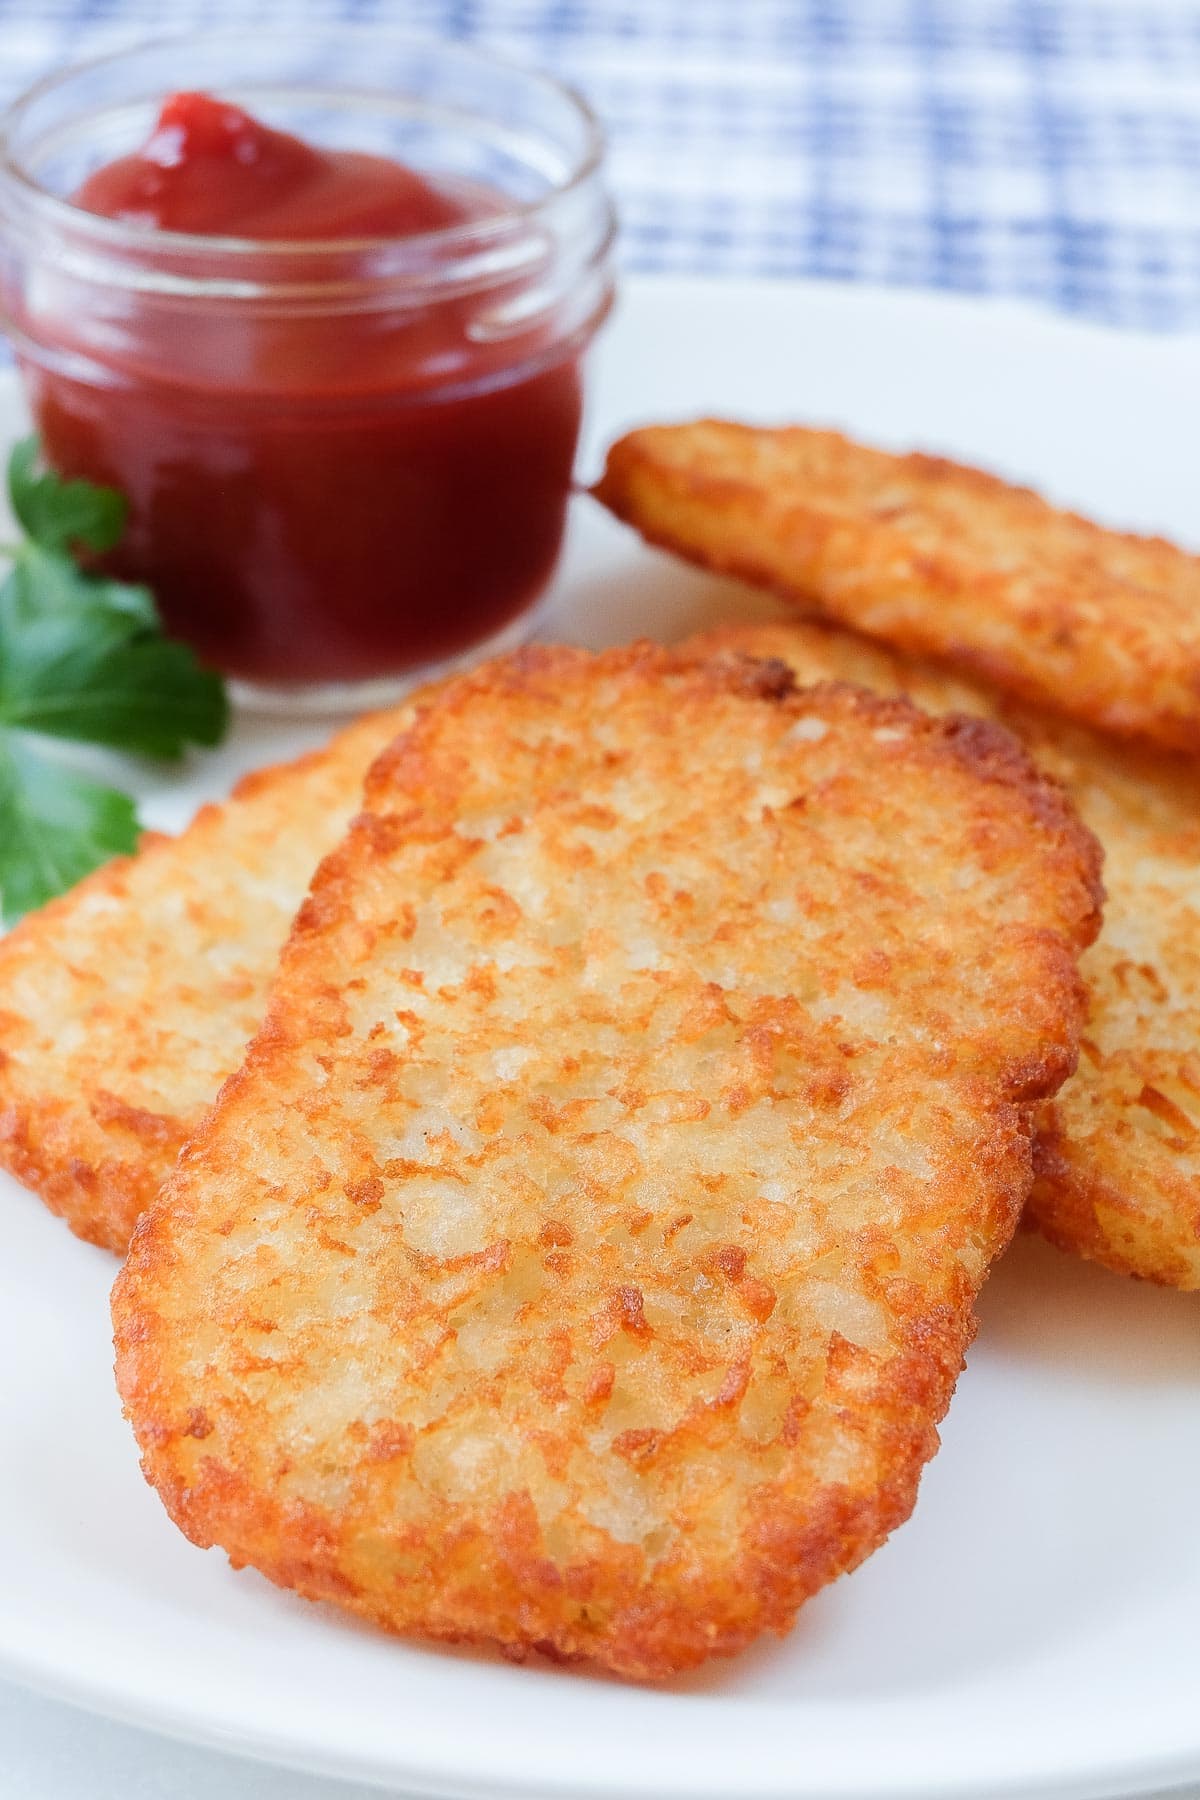 crispy golden brown hash brown patties on white plate with ketchup behind